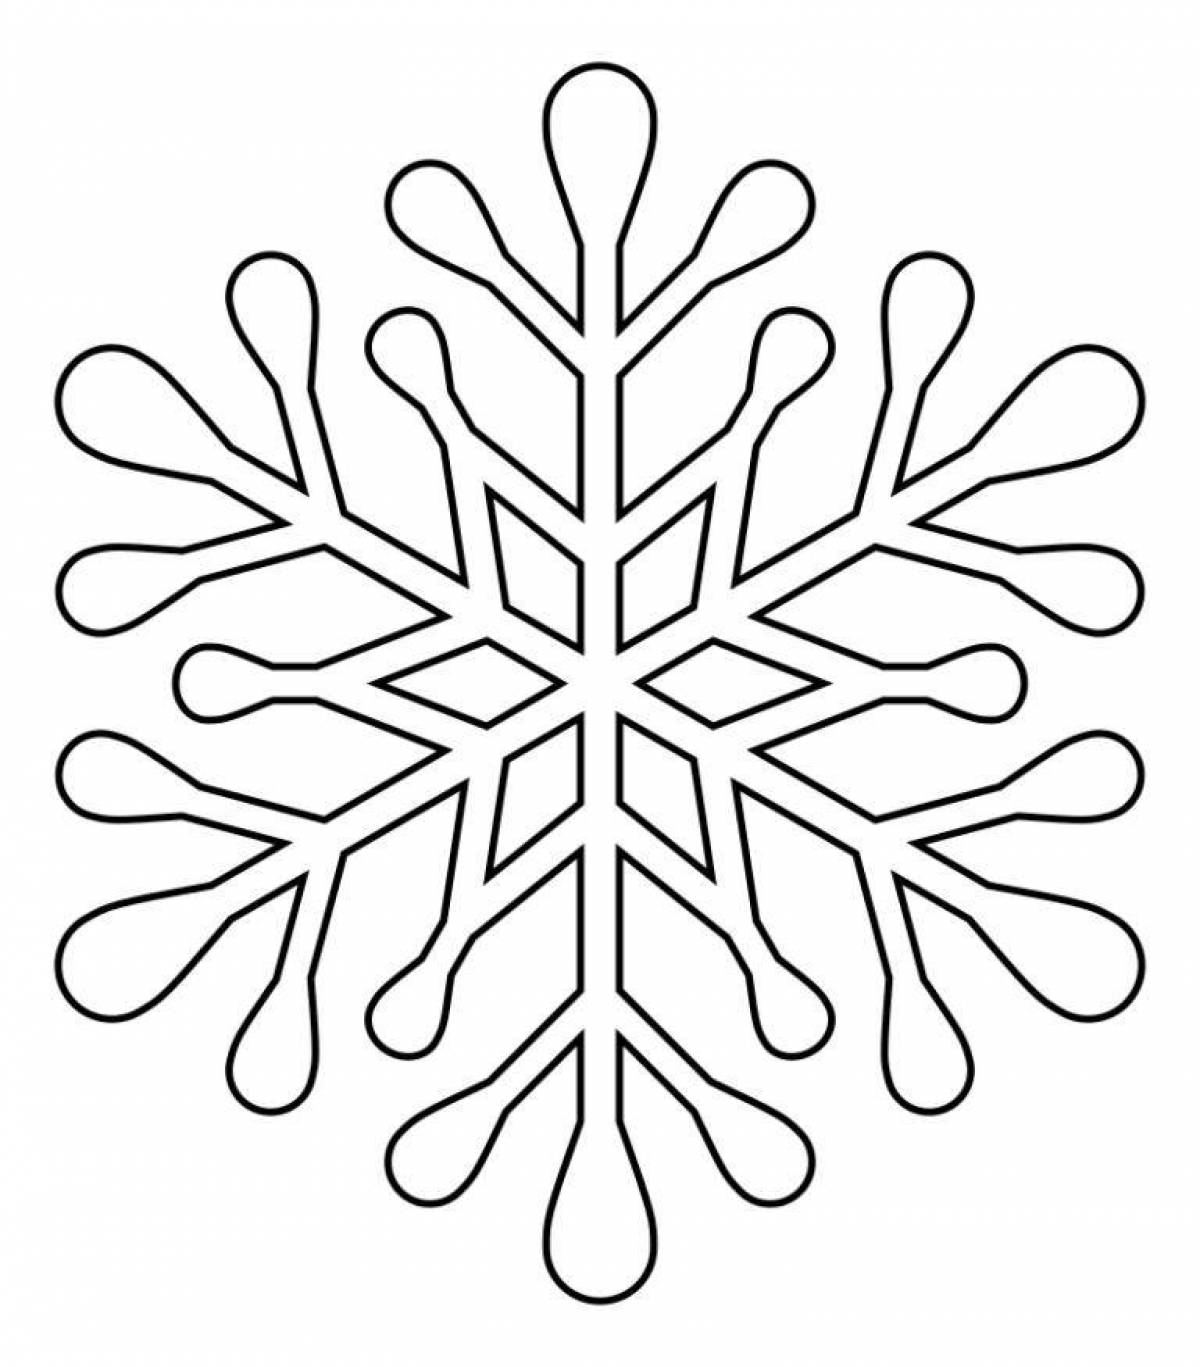 Sparkling snowflake coloring pages for 4-5 year olds